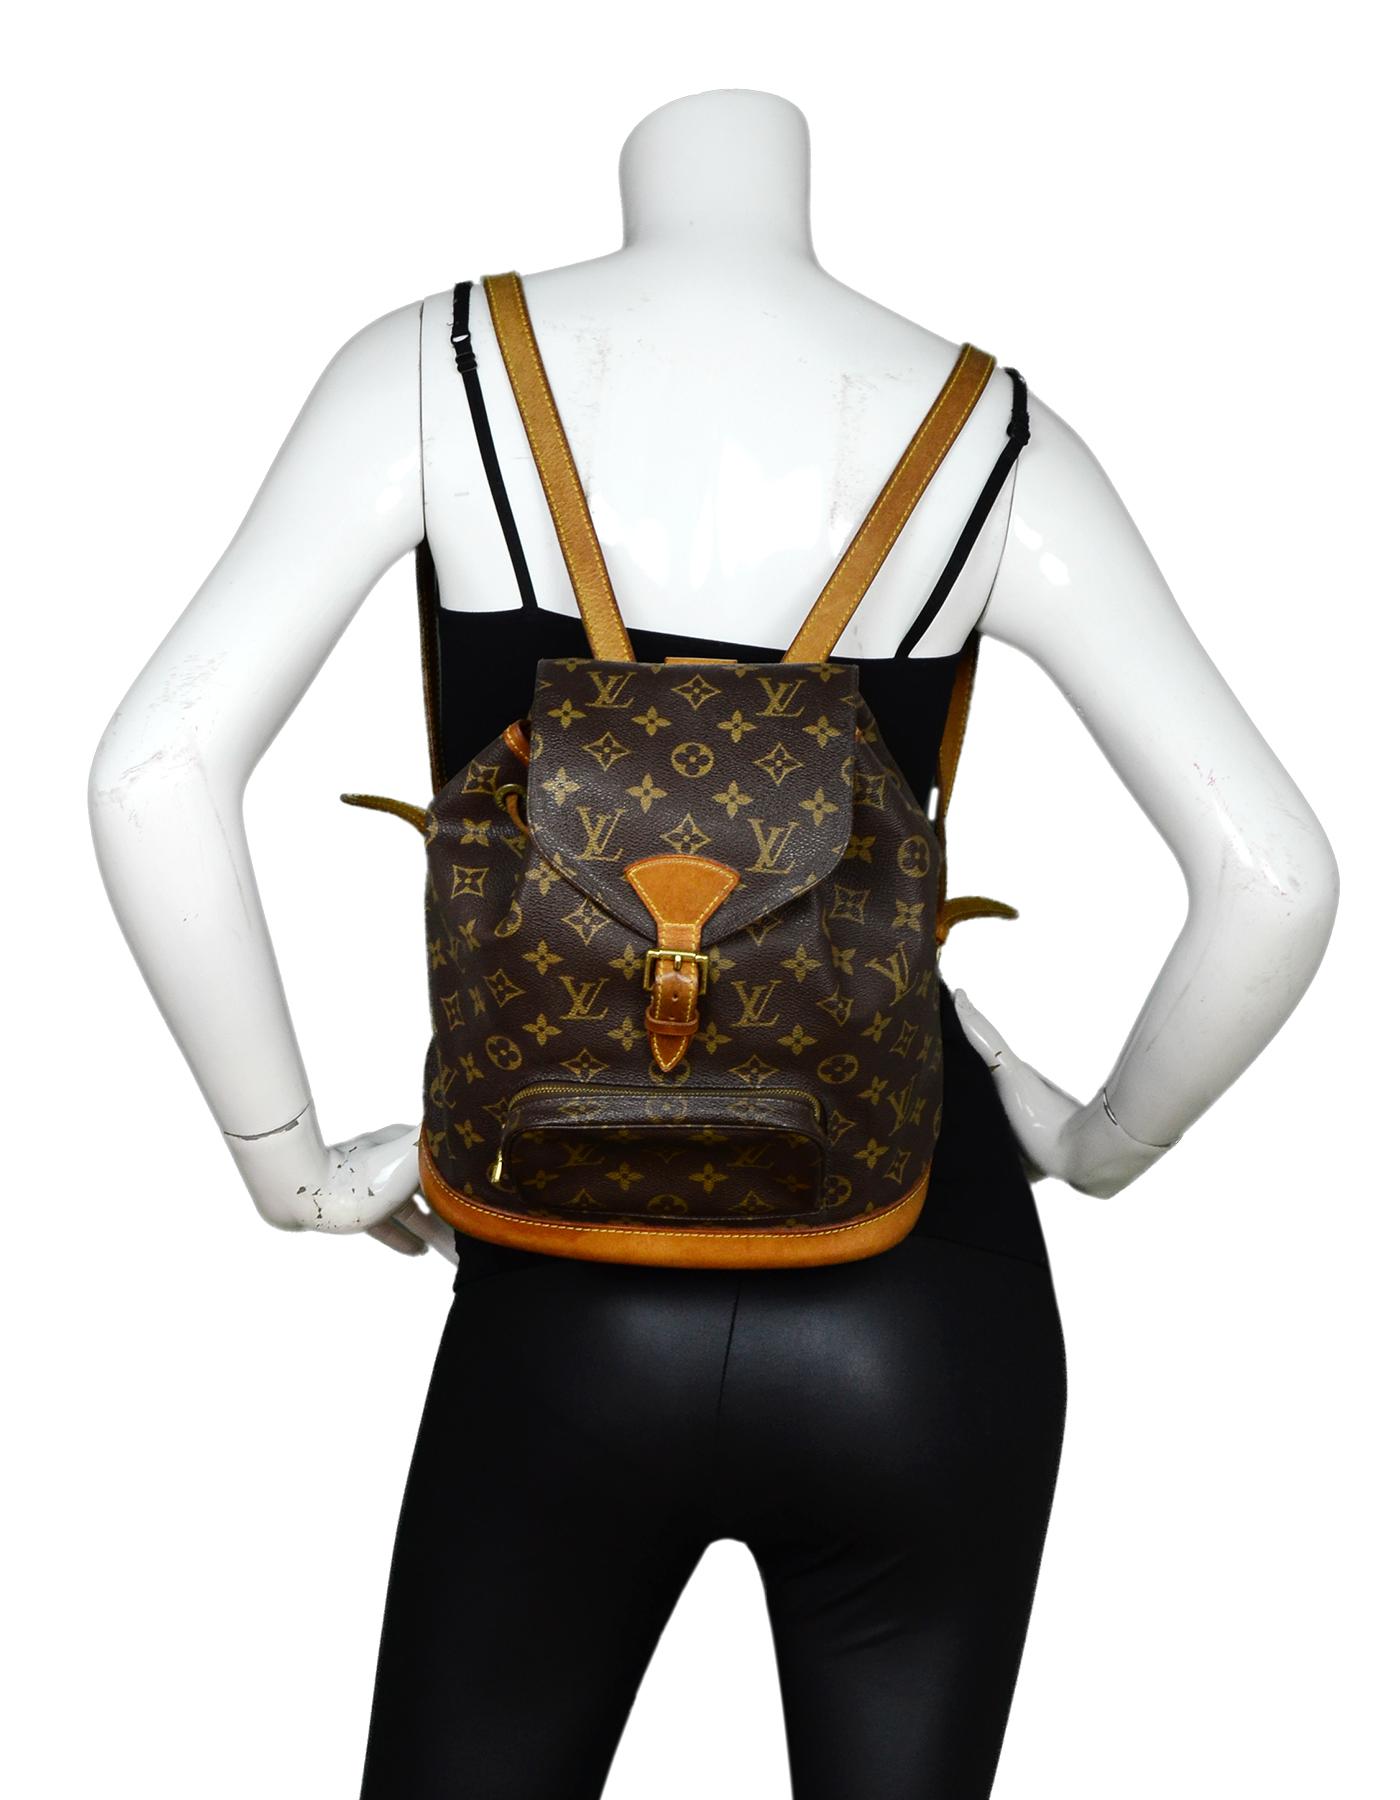 Louis Vuitton Vintage 90s LV Monogram Canvas Montsouris MM Backpack Bag

Made In: USA
Year of Production: 1998
Color: Brown/tan
Hardware: Goldtone
Materials: Coated canvas, leather
Lining: Brown canvas textile
Closure/Opening: Flap top with buckle